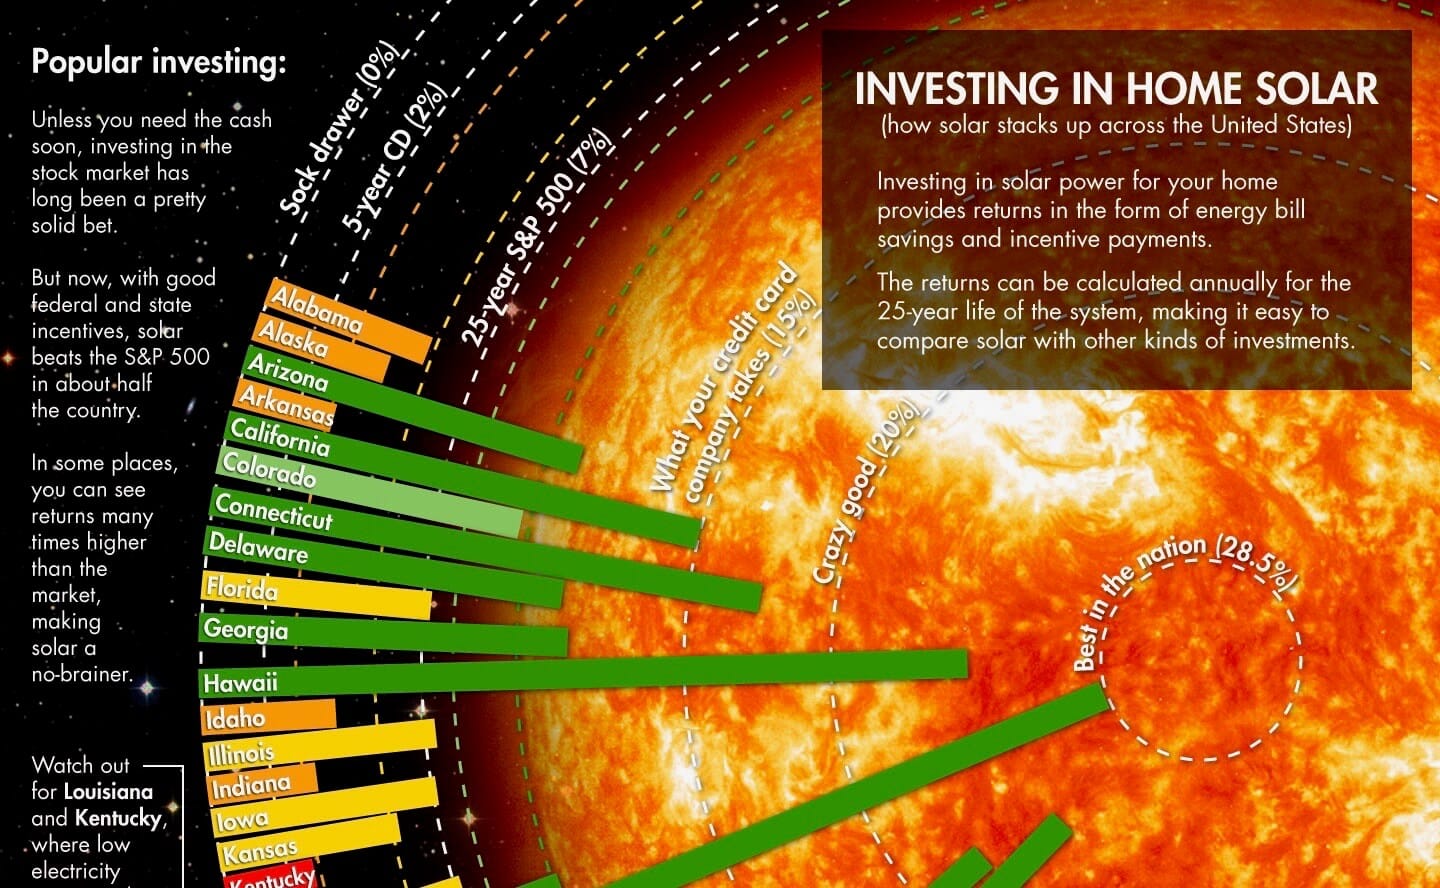 Investing in Home Solar infographic, ROI by state